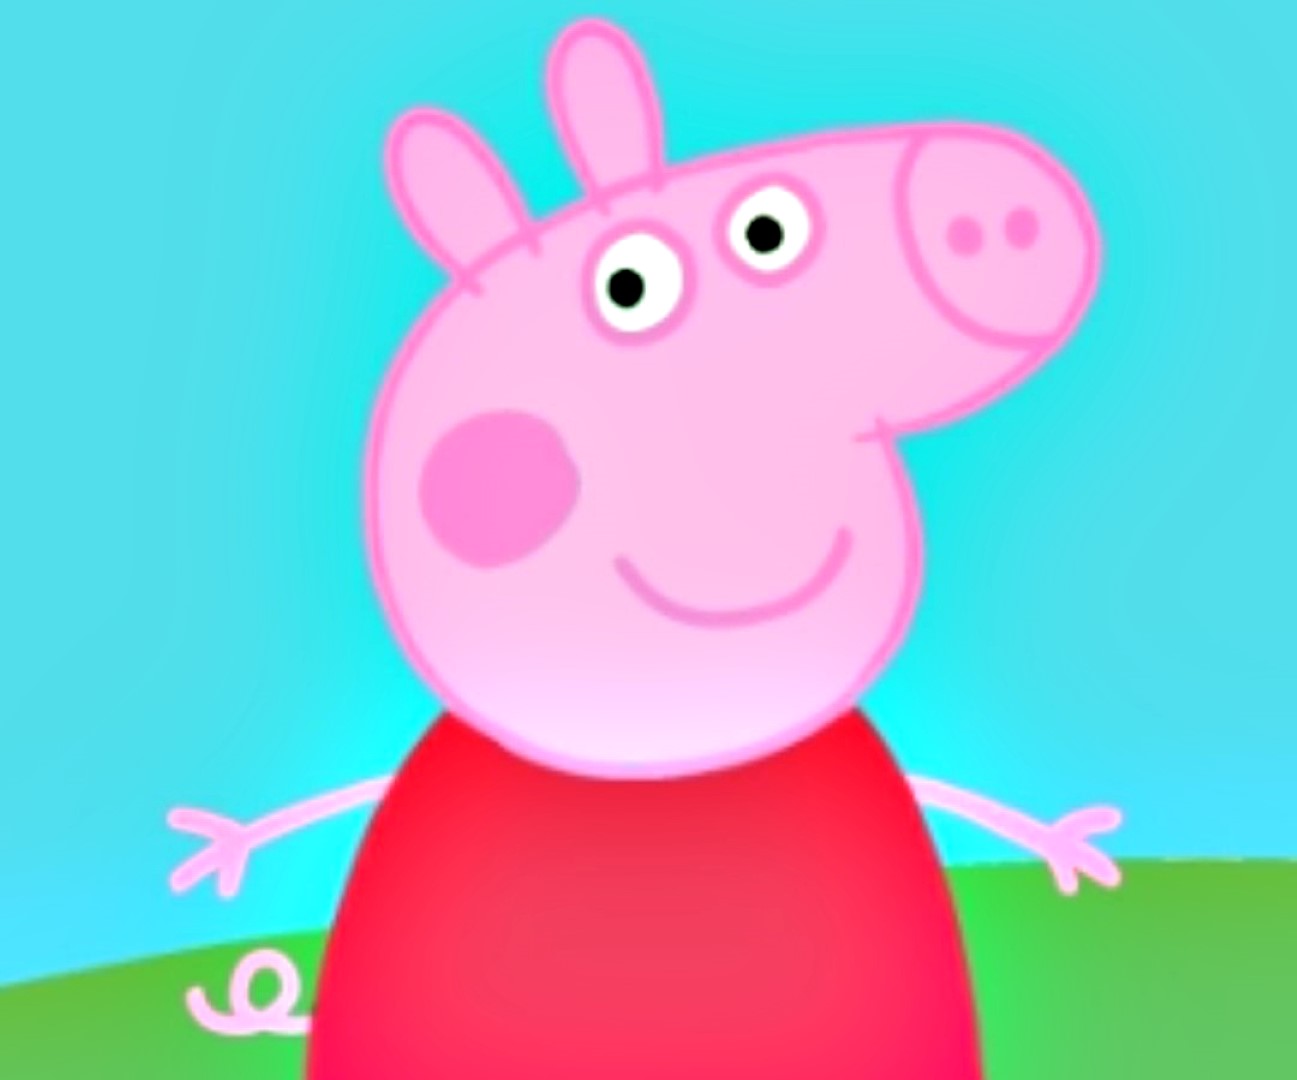 How To Draw Peppa Pig - Draw Central